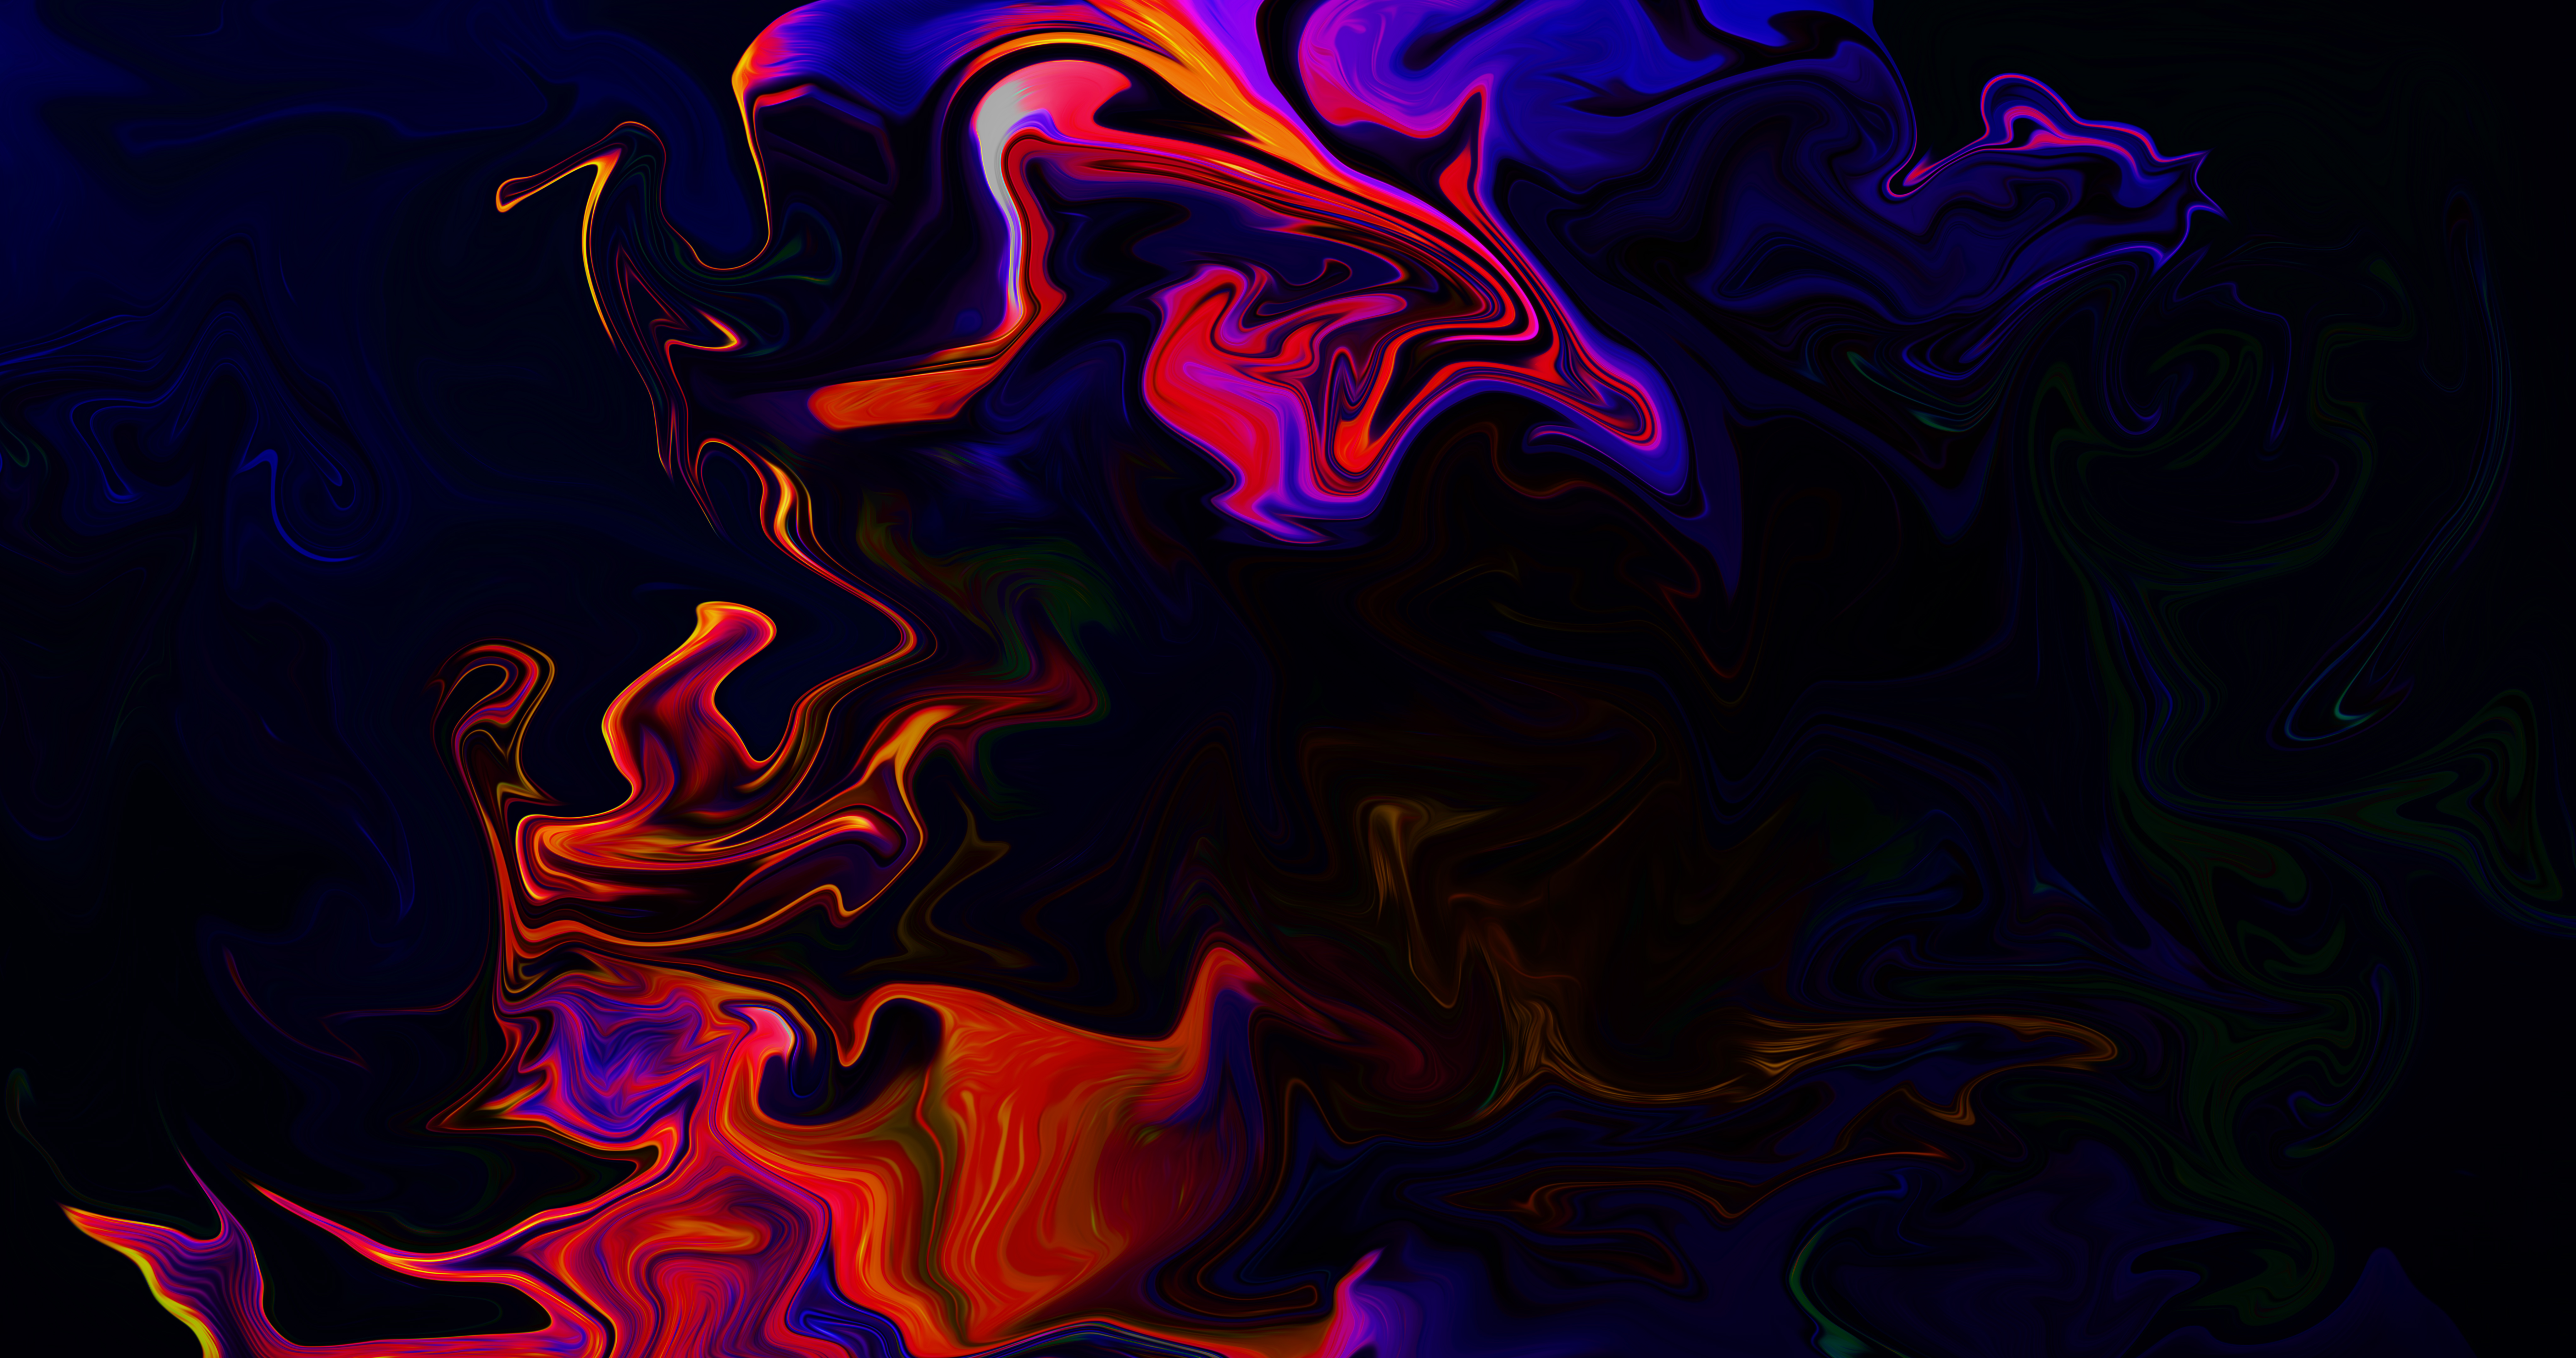 General 8192x4320 abstract shapes colorful fluid liquid artwork digital art paint brushes neon red blue dark 8 K